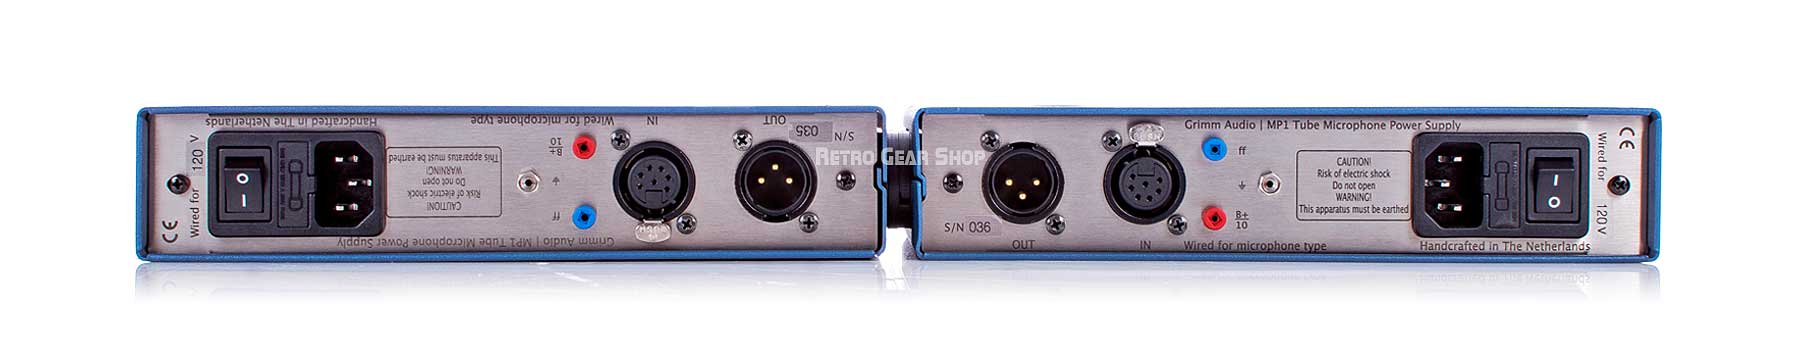 Grimm MP1 19" Stereo Pair Rear